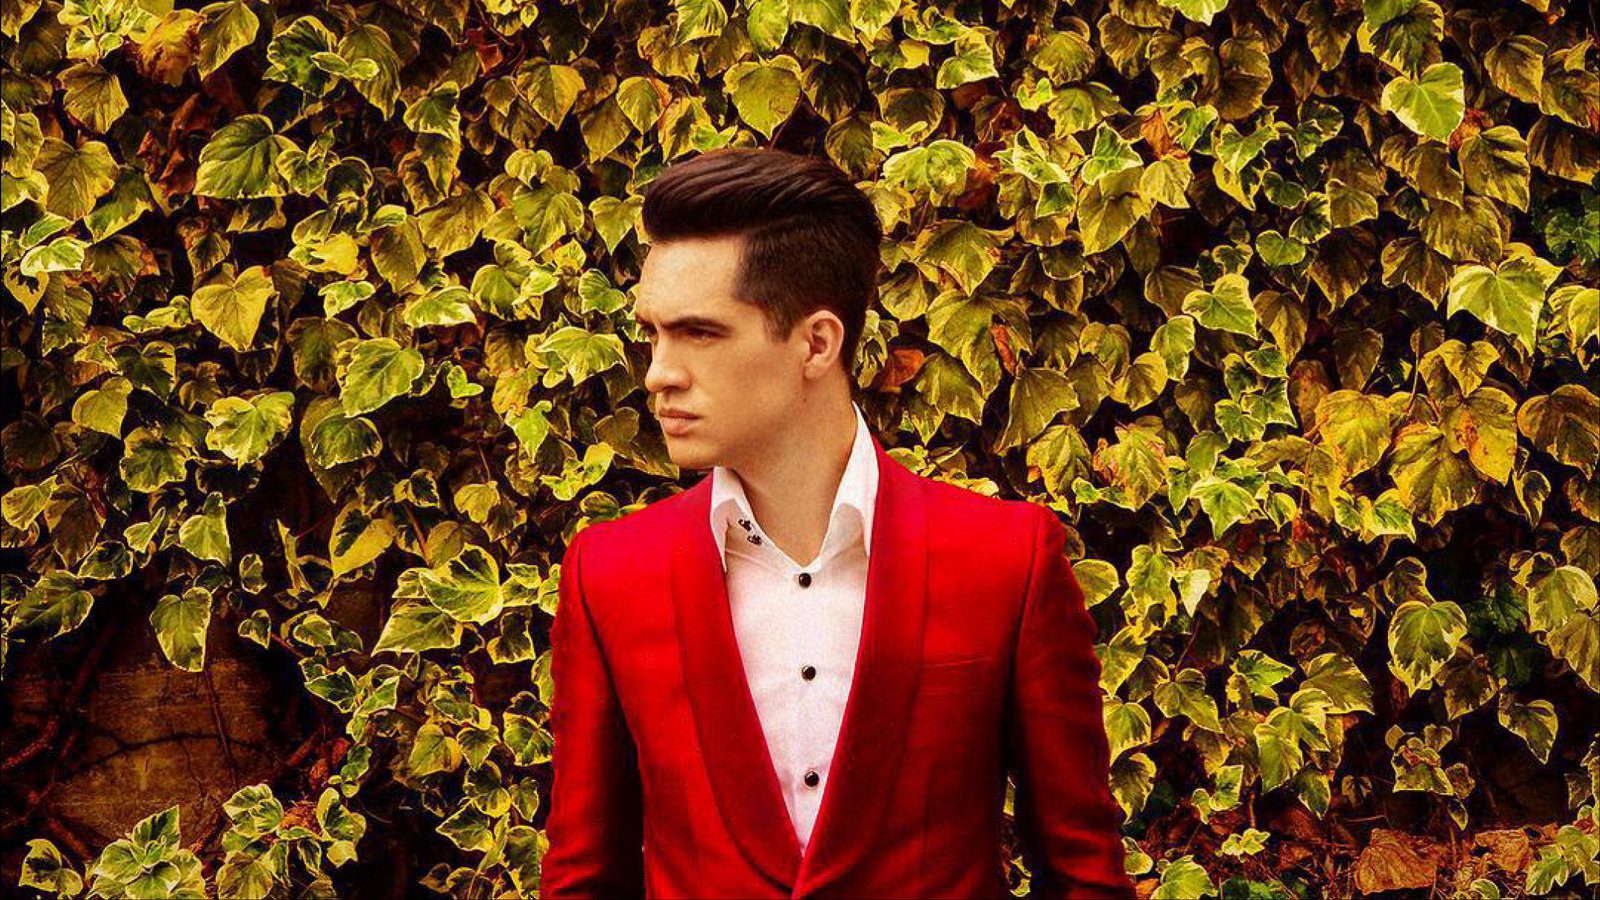 Panic! at the Disco – Death of a Bachelor